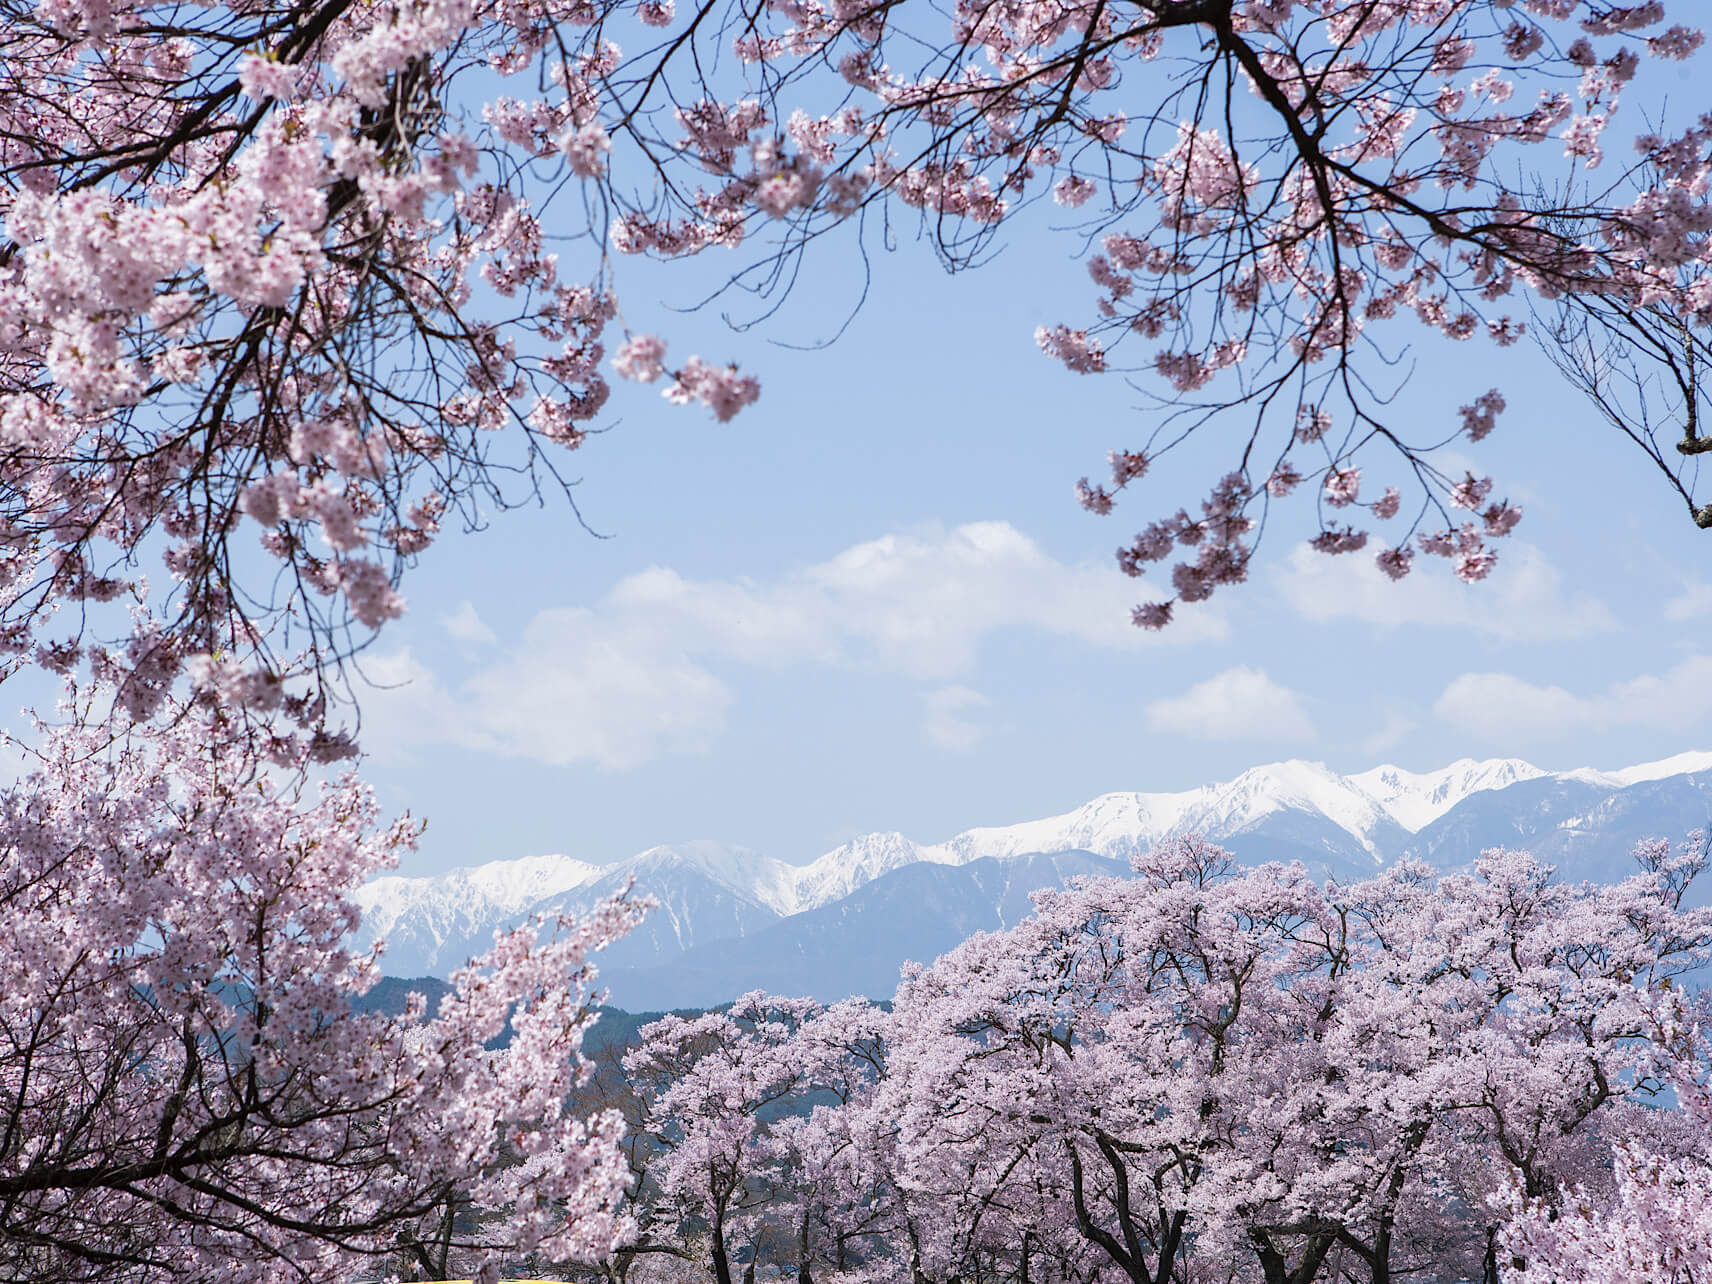 Northern Alps and cherry blossom